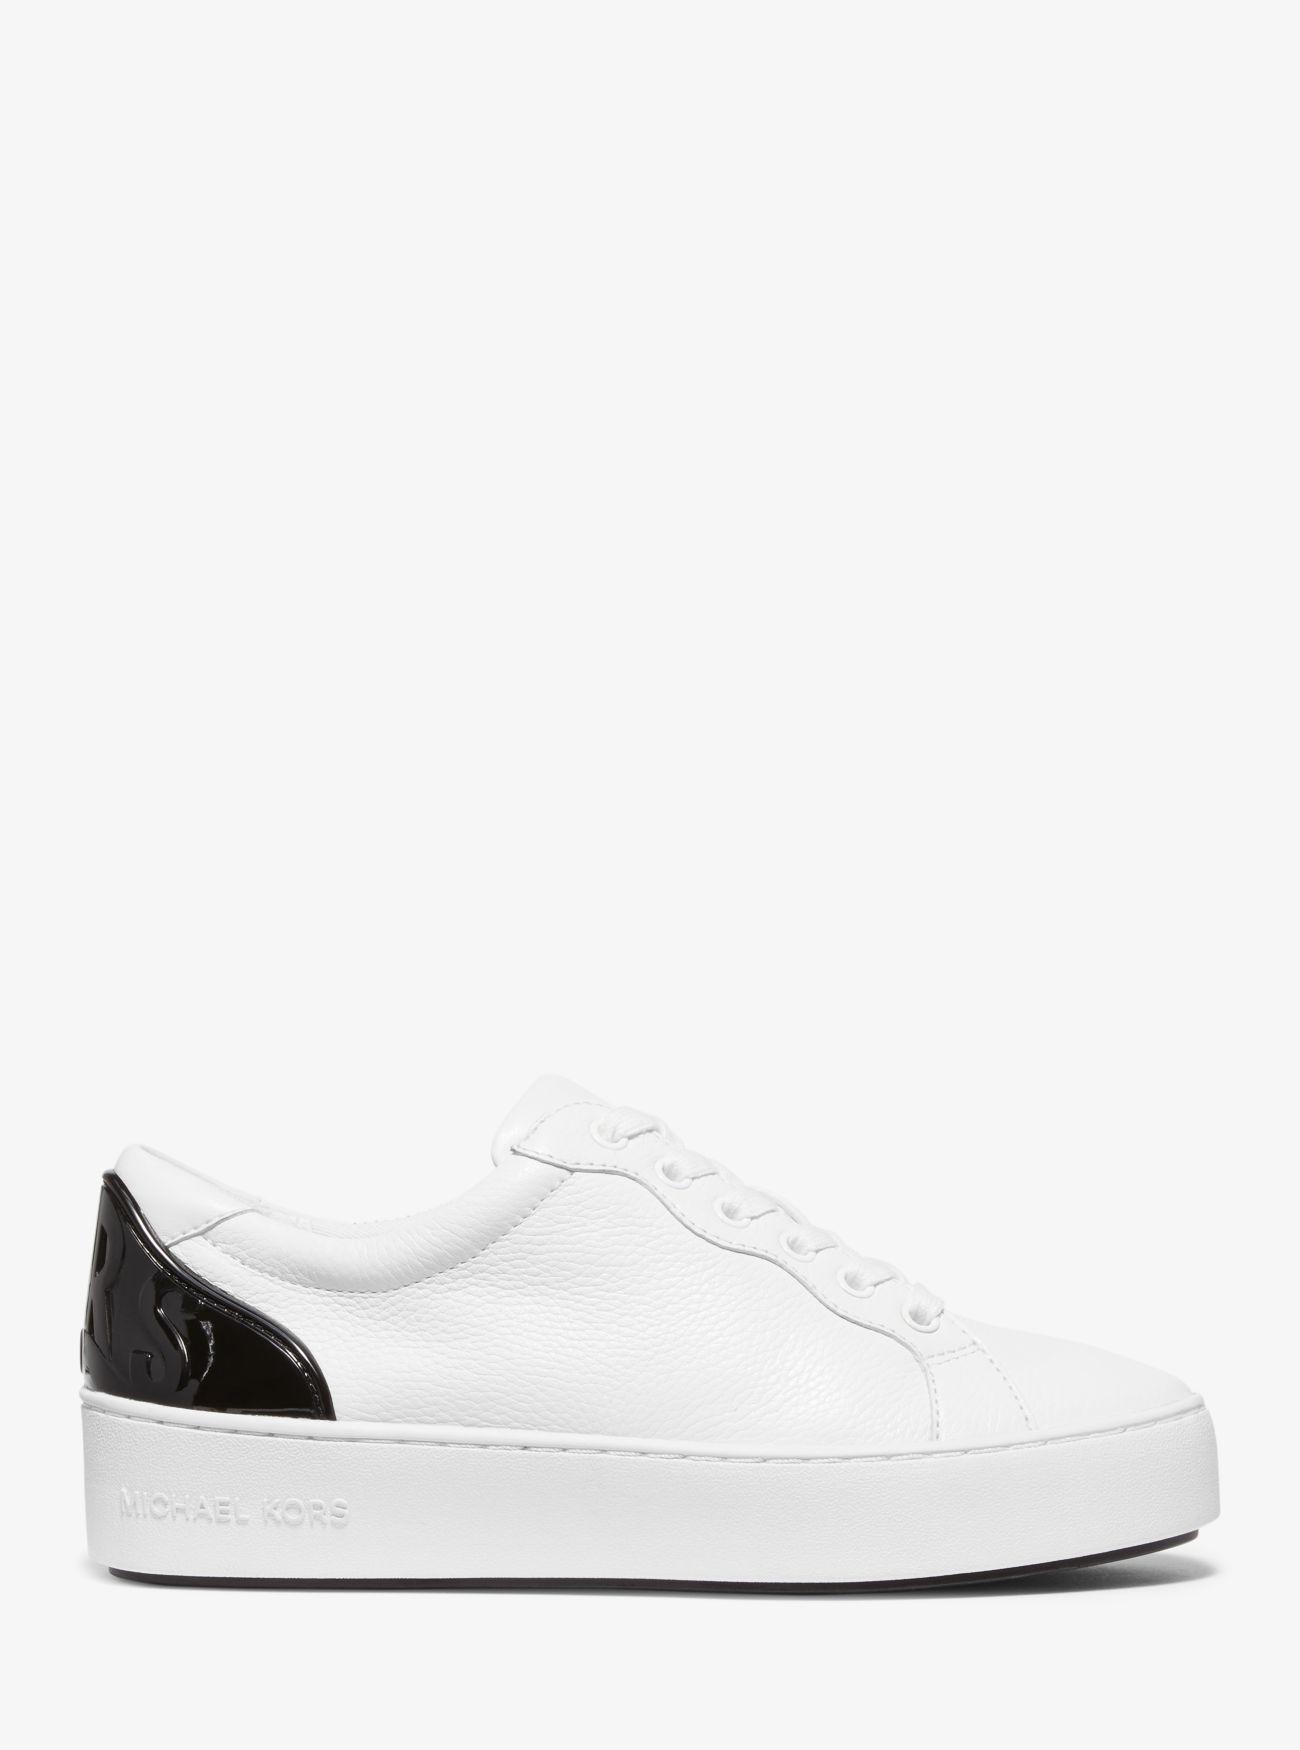 michael kors black and white sneakers